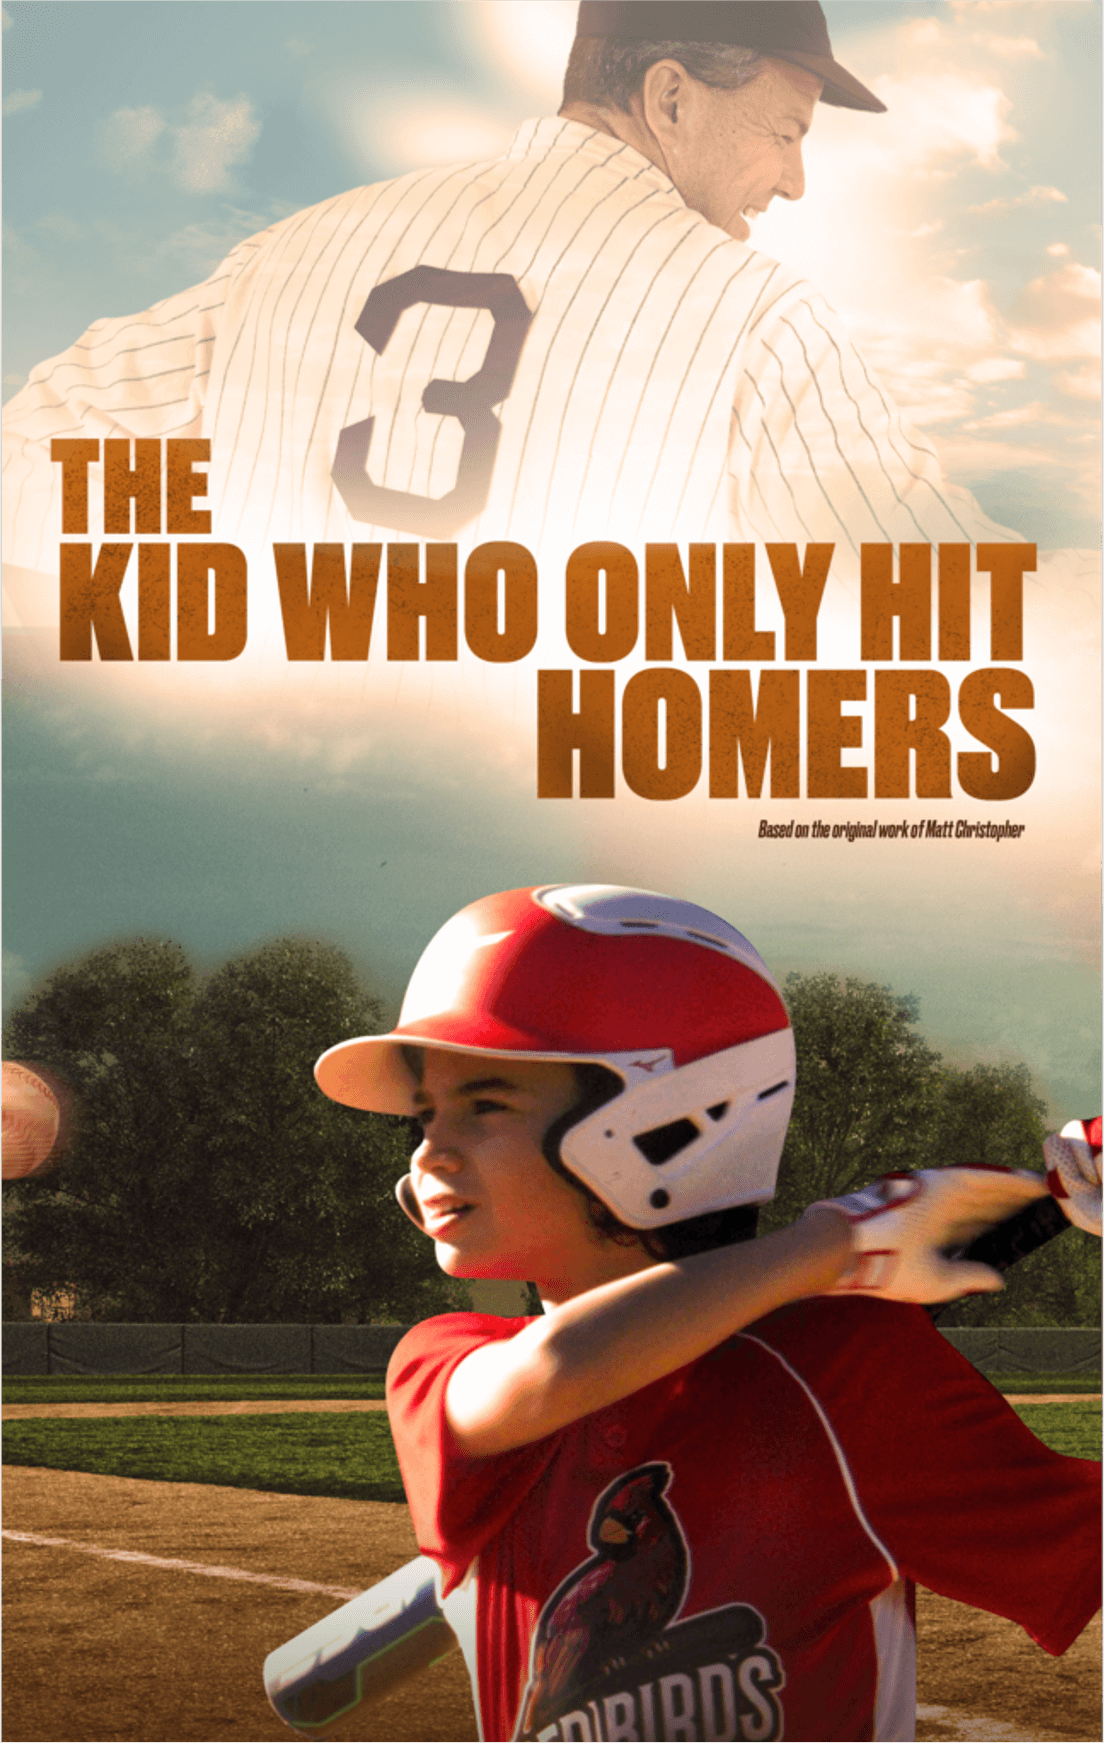 The Kid Who Only Hit Homers Movie produced by MIMO Studios, starring Alex J. Montero, Ryan Forrestal, and Jennifer Bonner.